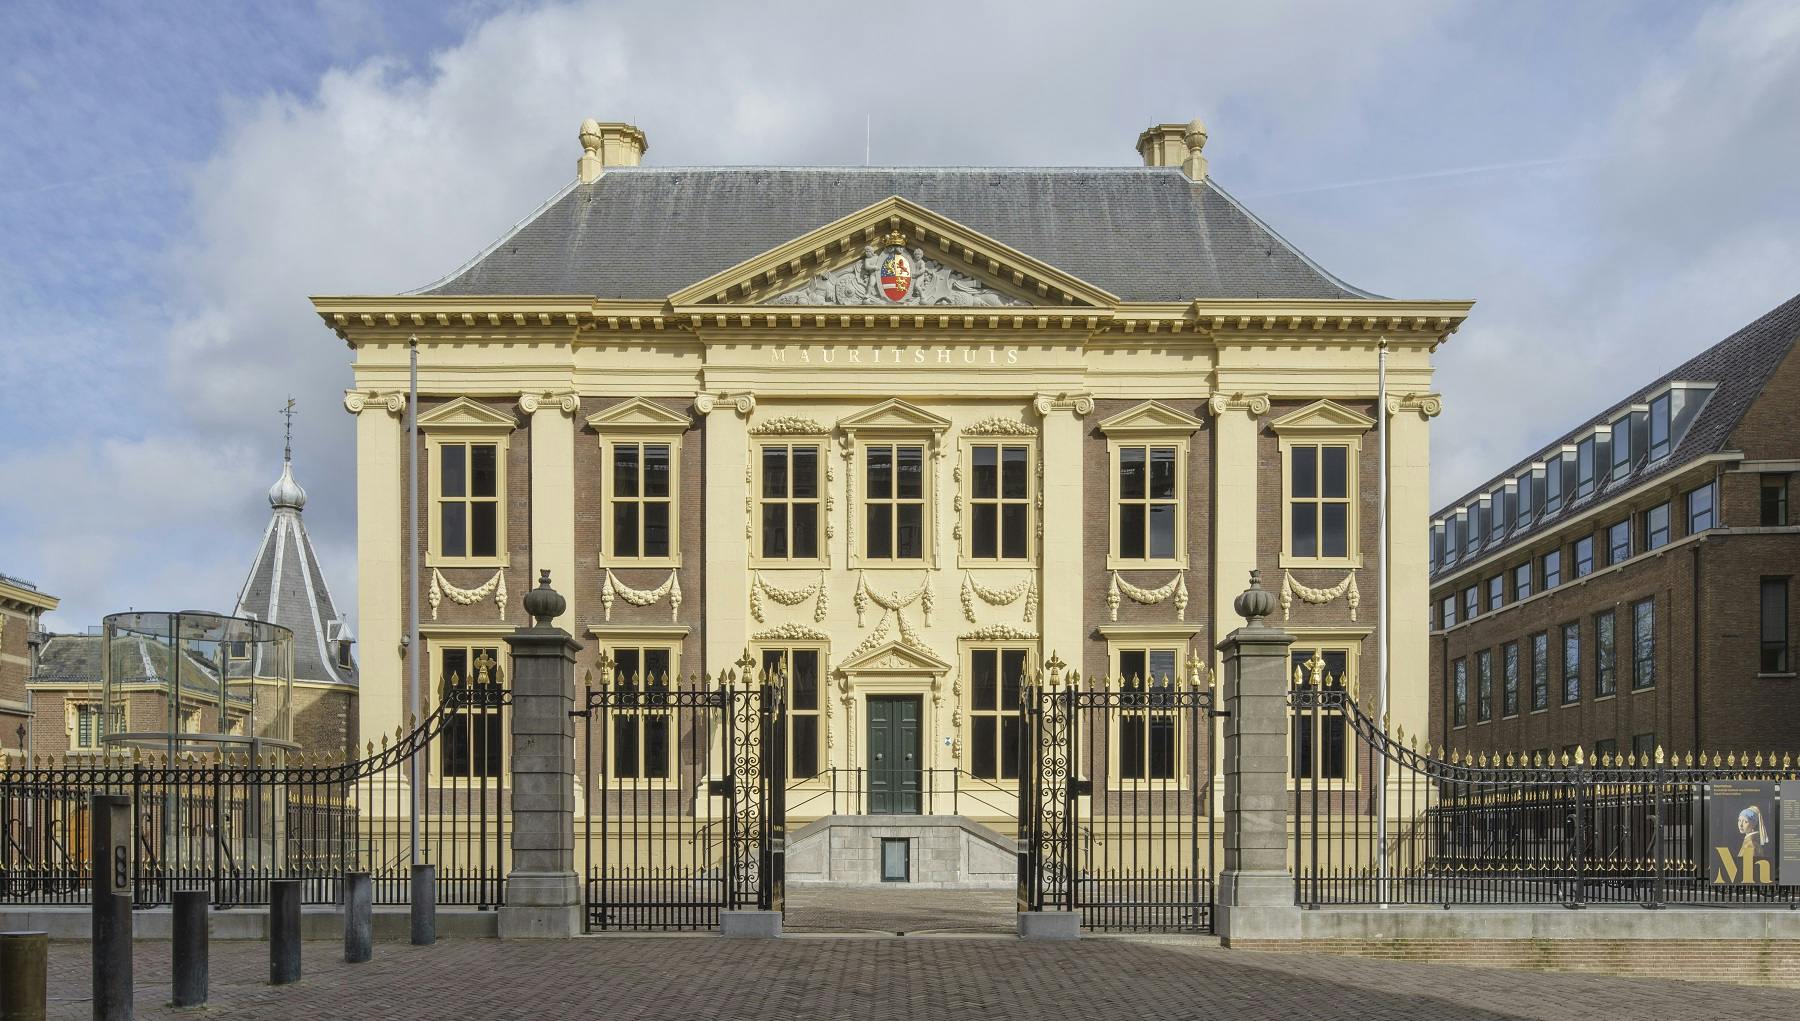 Mauritshuis Royal Picture Gallery - The Hague